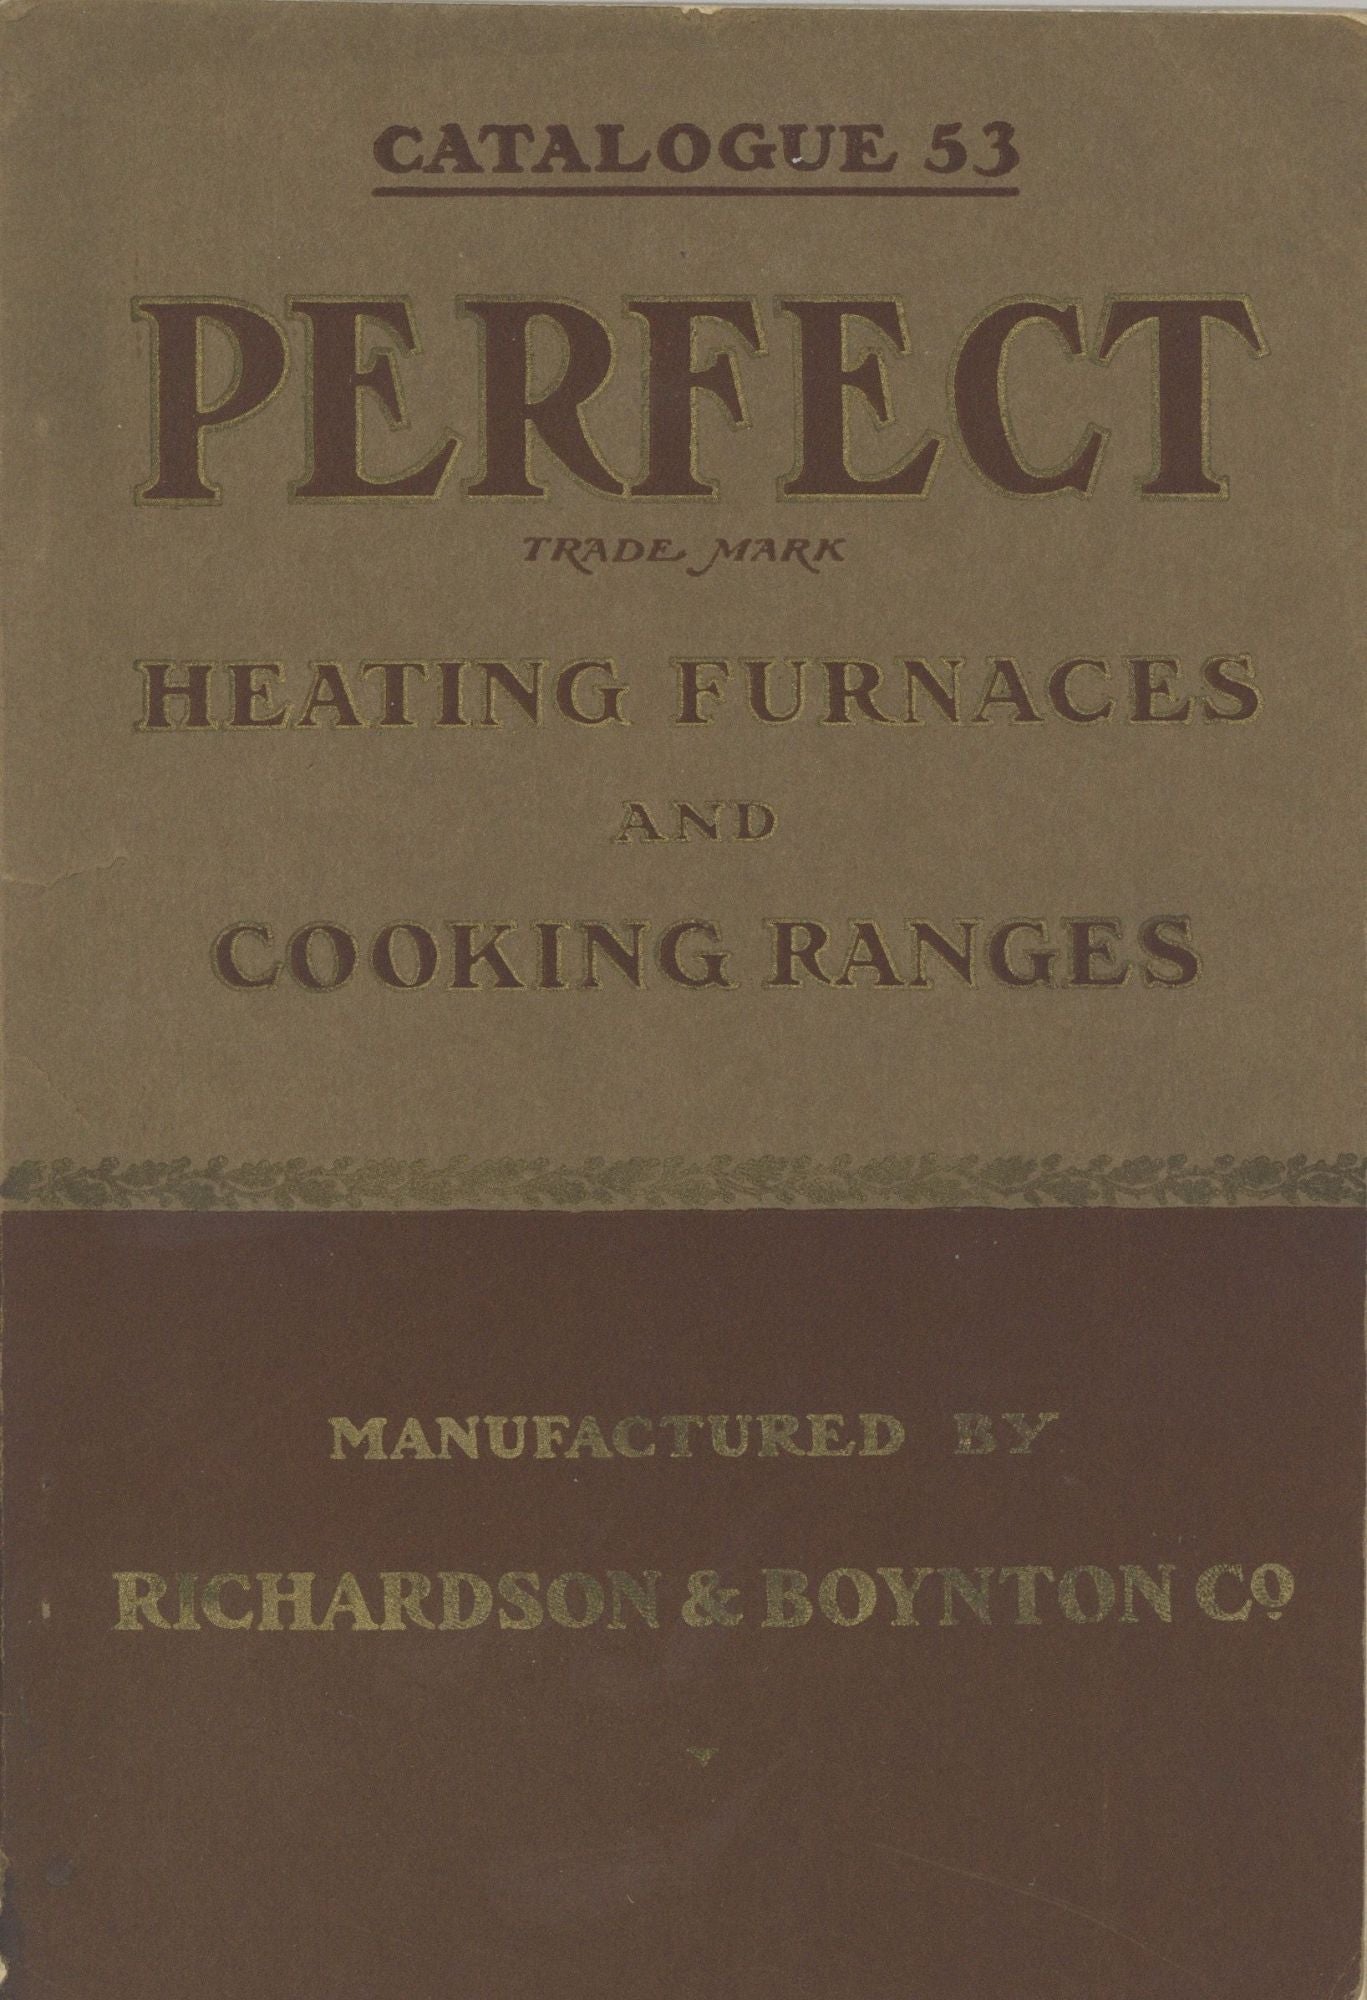 Item #4969 The Celebrated "Perfect" Heating Furnaces and Cooking Ranges: "Perfect" Manufactured by Richards & Boynton Co. Catalogue 53. Trade Catalogue – Furnaces, Stoves, Richardson, Boynton Co.